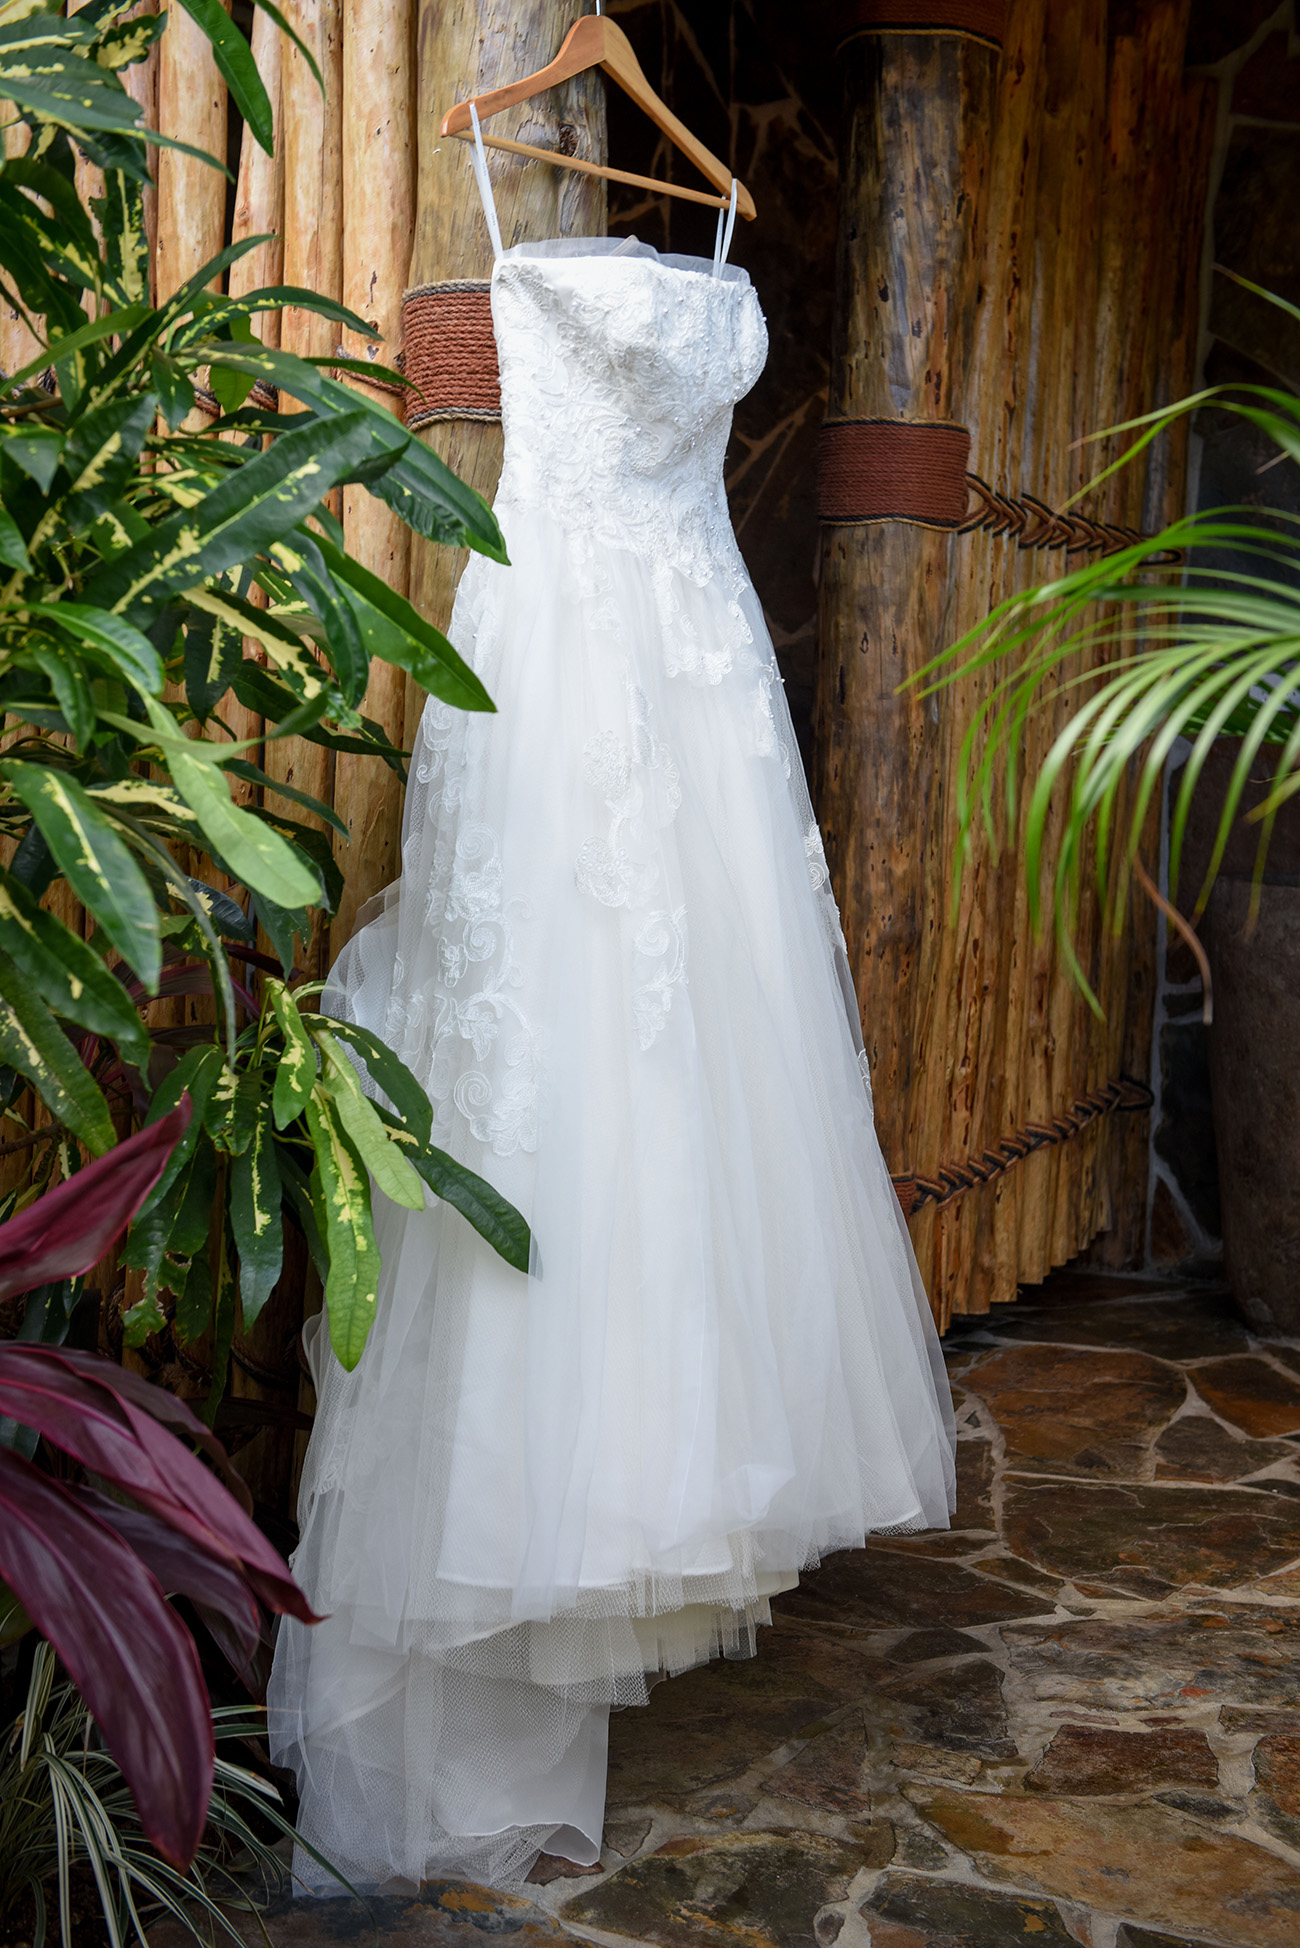 Wedding dress hanging with tropical greens At Paradise Cove Island resort in the Yasawas, Fiji